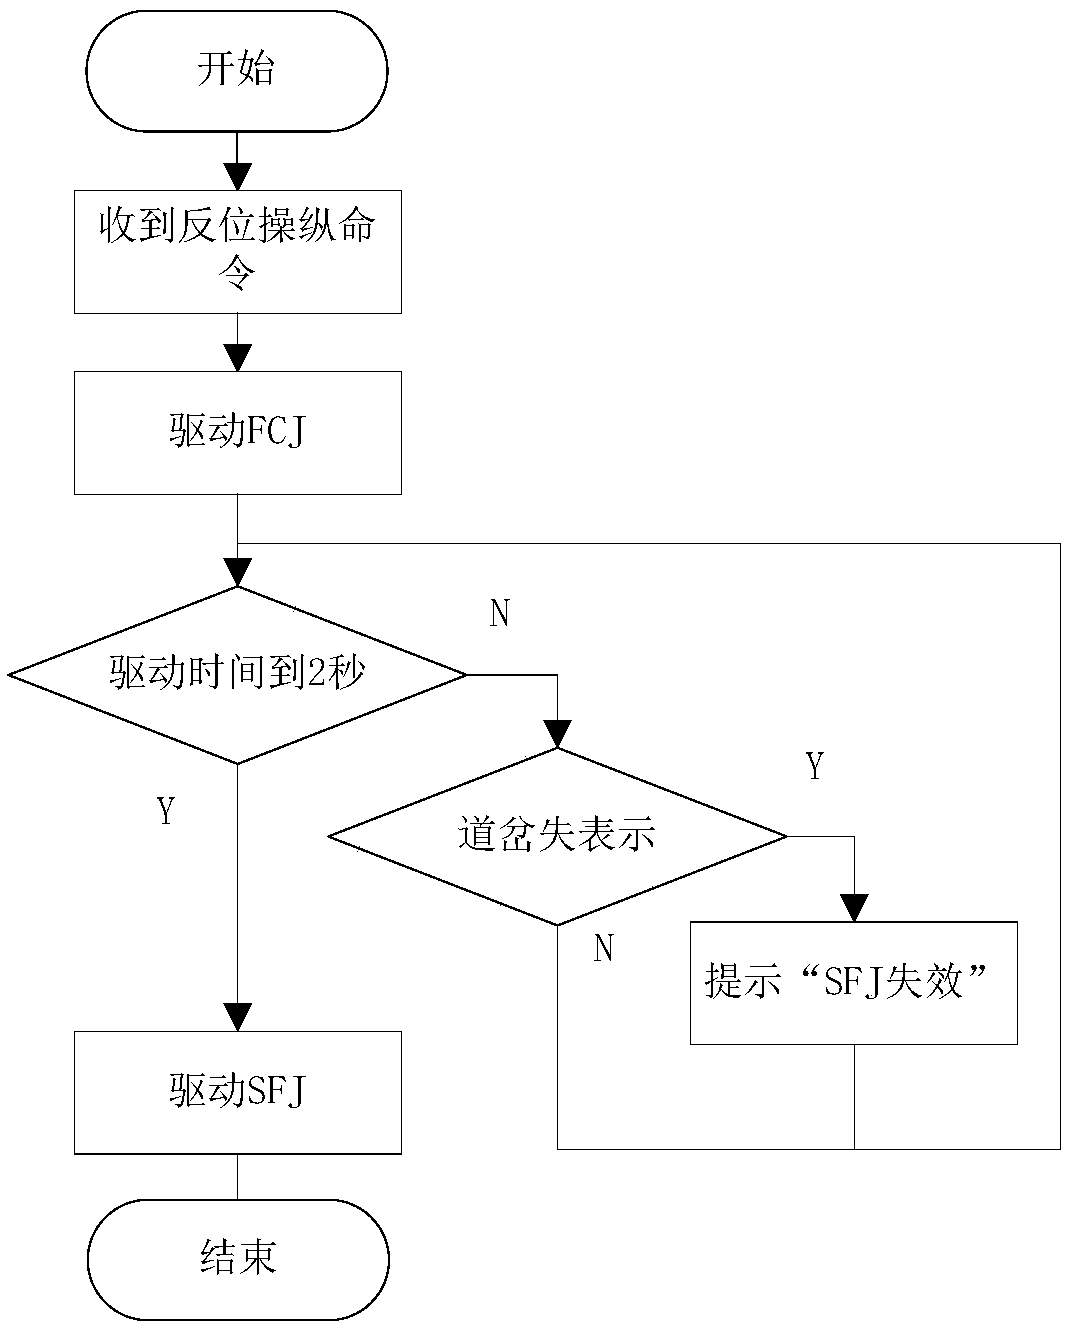 Intelligent diagnosing method based on timing sequence for computer interlocking system turnout operation and maintenance